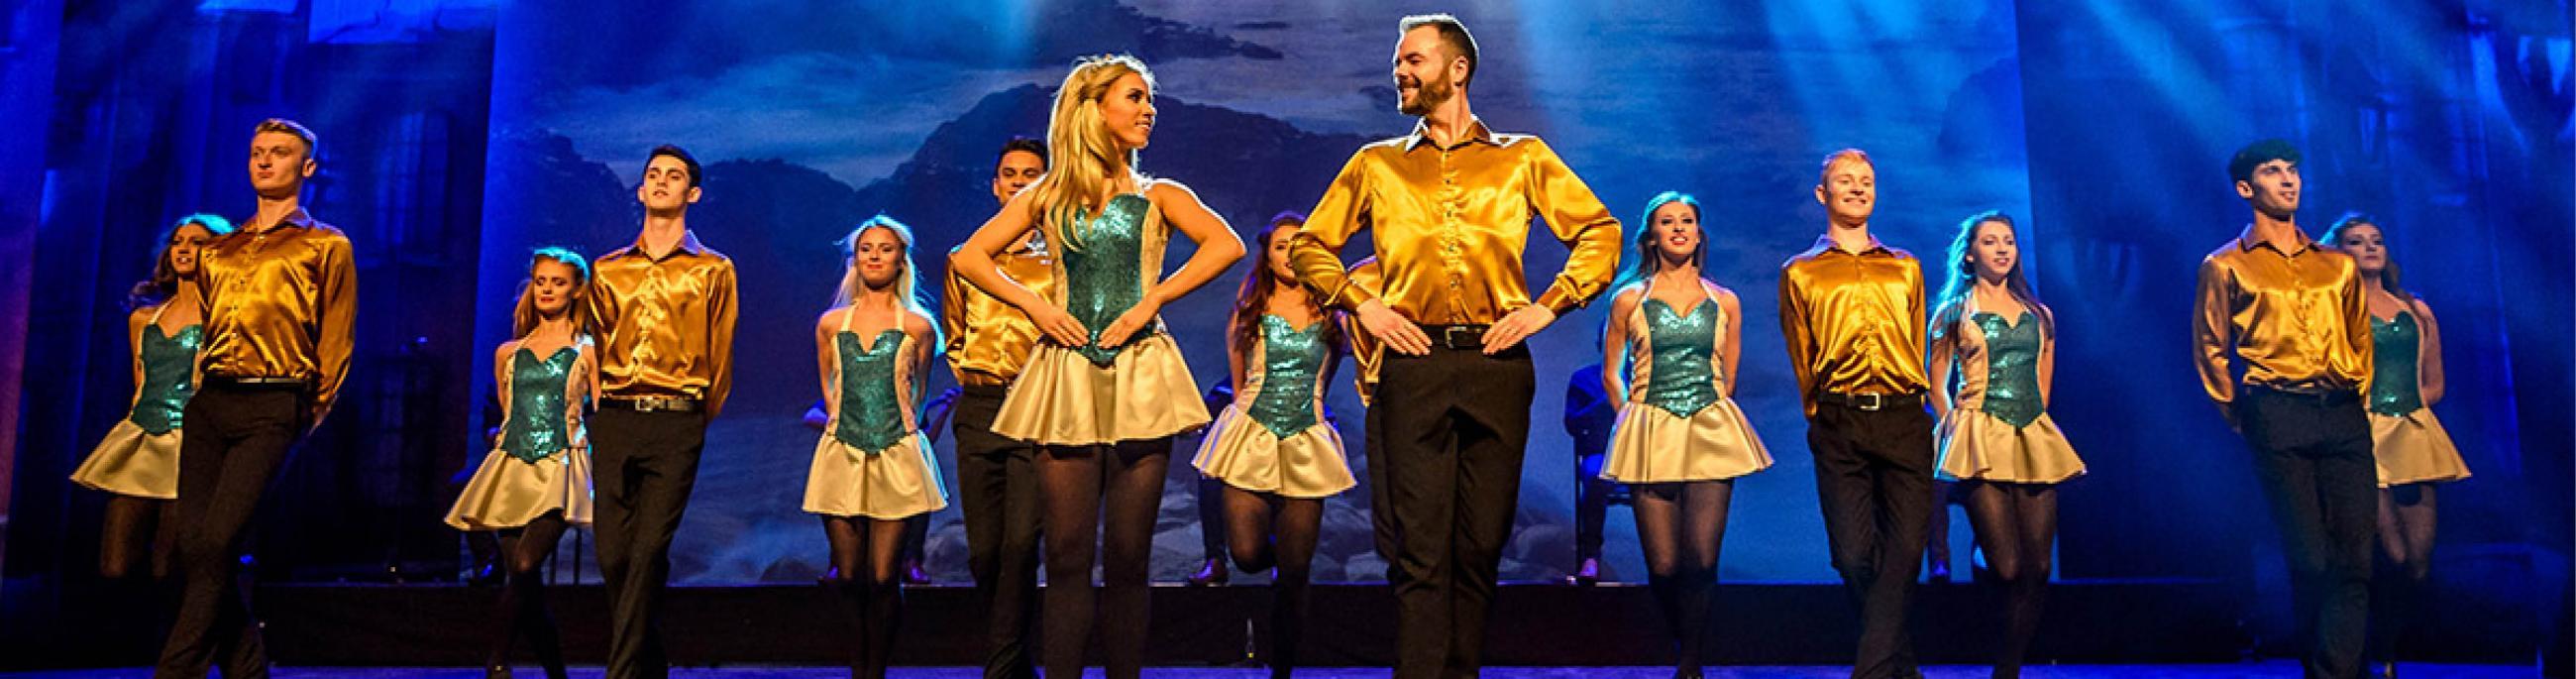 Irish step dancers wearing yellow shirts dance in front of a blue background